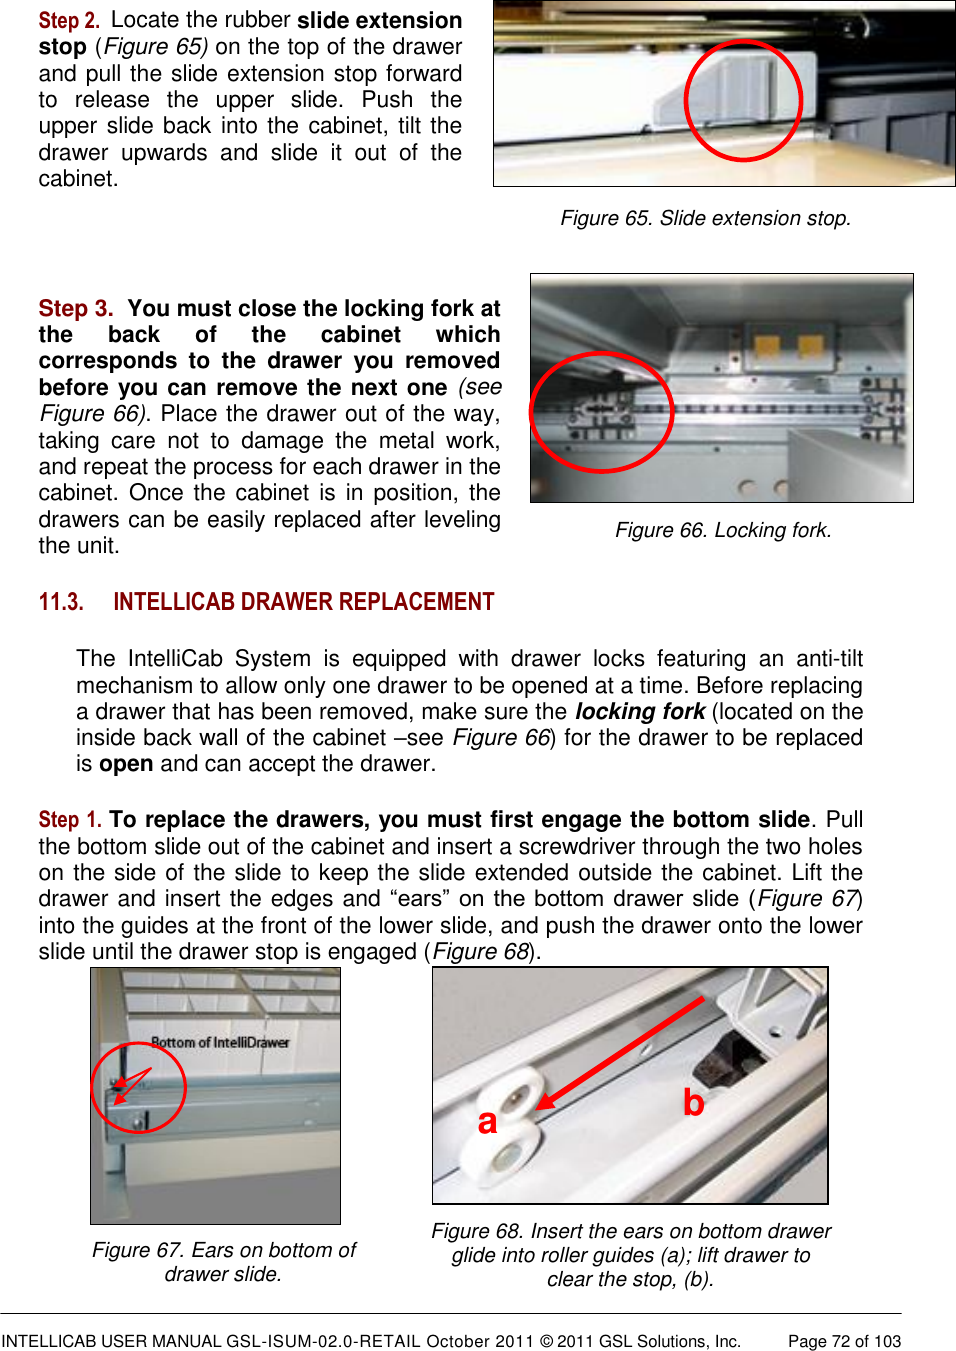  INTELLICAB USER MANUAL GSL-ISUM-02.0-RETAIL October 2011 © 2011 GSL Solutions, Inc.   Page 72 of 103   Figure 65. Slide extension stop. Figure 66. Locking fork.  Figure 68. Insert the ears on bottom drawer glide into roller guides (a); lift drawer to clear the stop, (b). a b  Figure 67. Ears on bottom of drawer slide.  Step 2.  Locate the rubber slide extension stop (Figure 65) on the top of the drawer and pull the slide extension stop forward to  release  the  upper  slide.  Push  the upper slide back into the cabinet, tilt the drawer  upwards  and  slide  it  out  of  the cabinet.   Step 3.  You must close the locking fork at the  back  of  the  cabinet  which corresponds  to  the  drawer  you  removed before you can remove the next one (see Figure 66). Place the drawer out of the way, taking  care  not  to  damage  the  metal  work, and repeat the process for each drawer in the cabinet. Once the  cabinet is  in  position,  the drawers can be easily replaced after leveling the unit. 11.3. INTELLICAB DRAWER REPLACEMENT The  IntelliCab  System  is  equipped  with  drawer  locks  featuring  an  anti-tilt mechanism to allow only one drawer to be opened at a time. Before replacing a drawer that has been removed, make sure the locking fork (located on the inside back wall of the cabinet –see Figure 66) for the drawer to be replaced is open and can accept the drawer.  Step 1. To replace the drawers, you must first engage the bottom slide. Pull the bottom slide out of the cabinet and insert a screwdriver through the two holes on the side of the slide to keep the slide extended outside the cabinet. Lift the drawer and insert the edges and “ears” on  the bottom drawer slide (Figure 67) into the guides at the front of the lower slide, and push the drawer onto the lower slide until the drawer stop is engaged (Figure 68).      